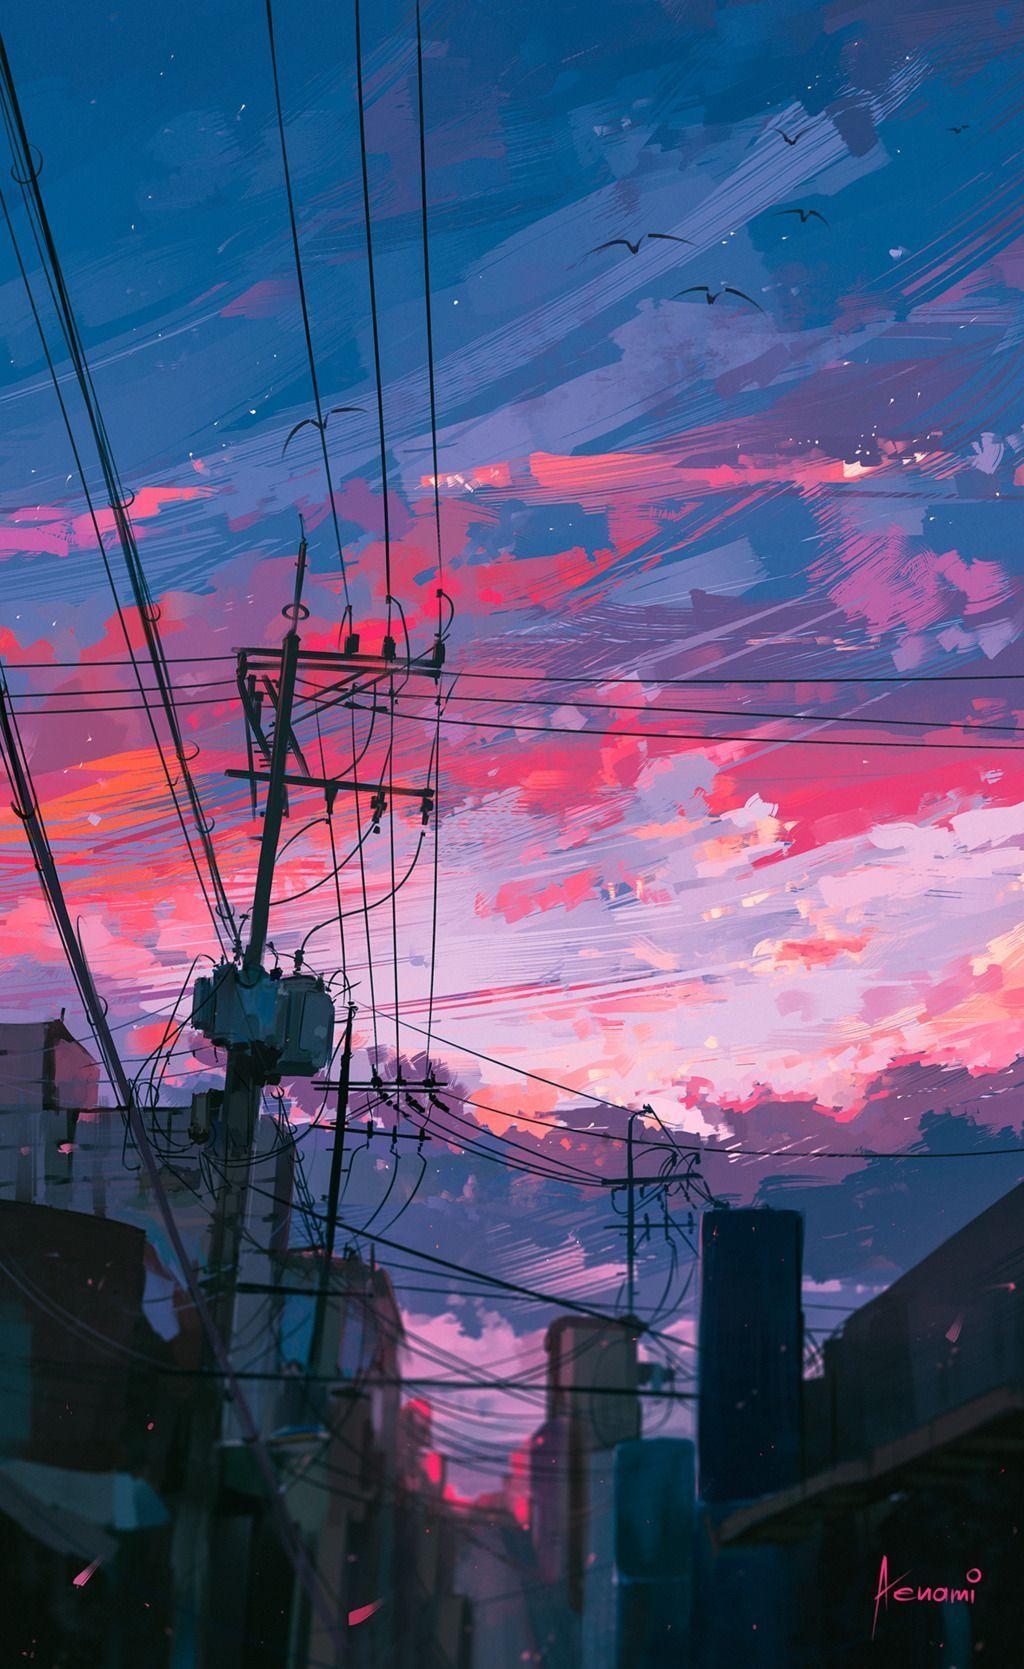 Download Image A peaceful Anime scene to fill you with chill vibes.  Wallpaper | Wallpapers.com